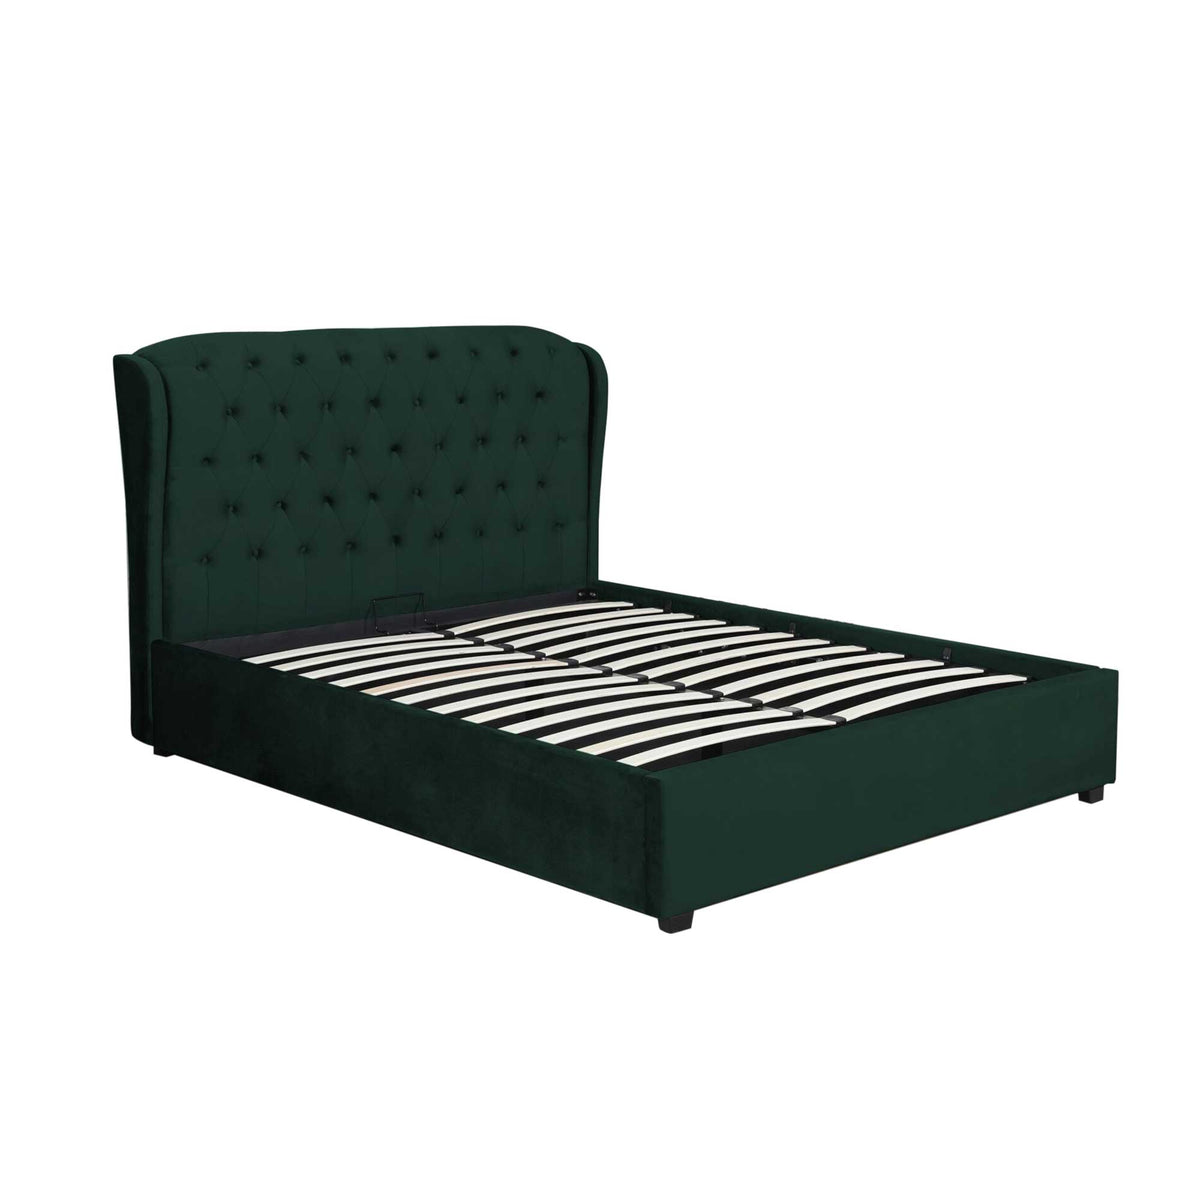 Aspen Bed Frame 5ft - 3 Colours Available